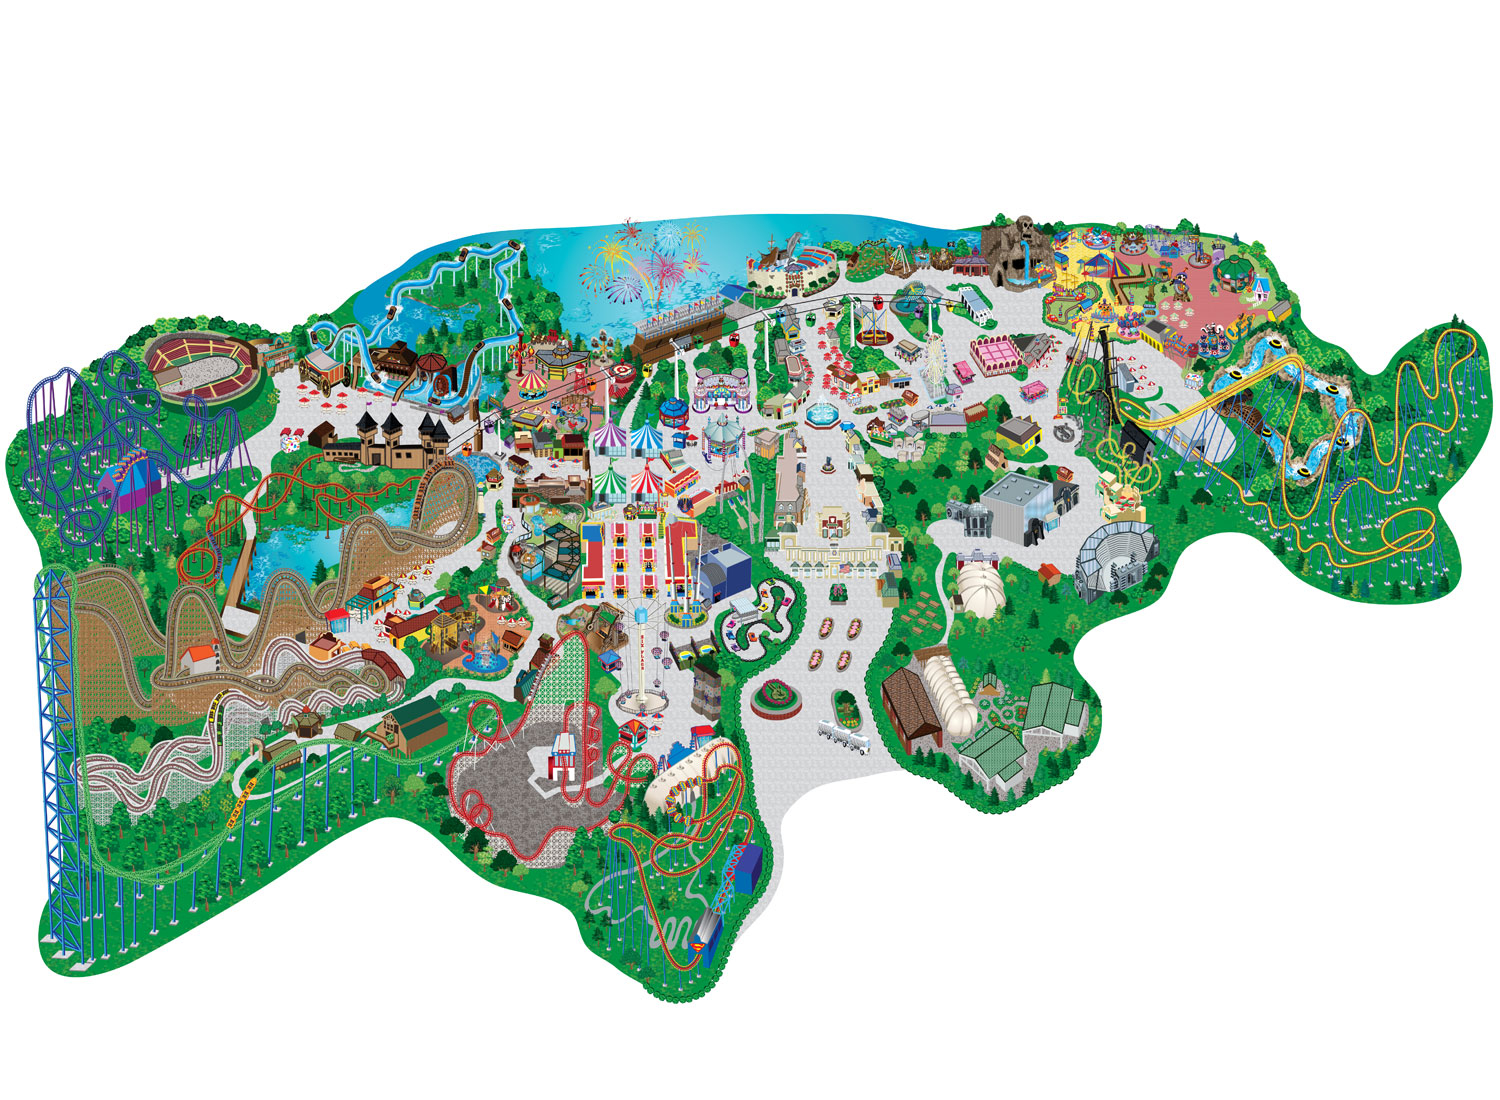 six flags great adventure pin schedule